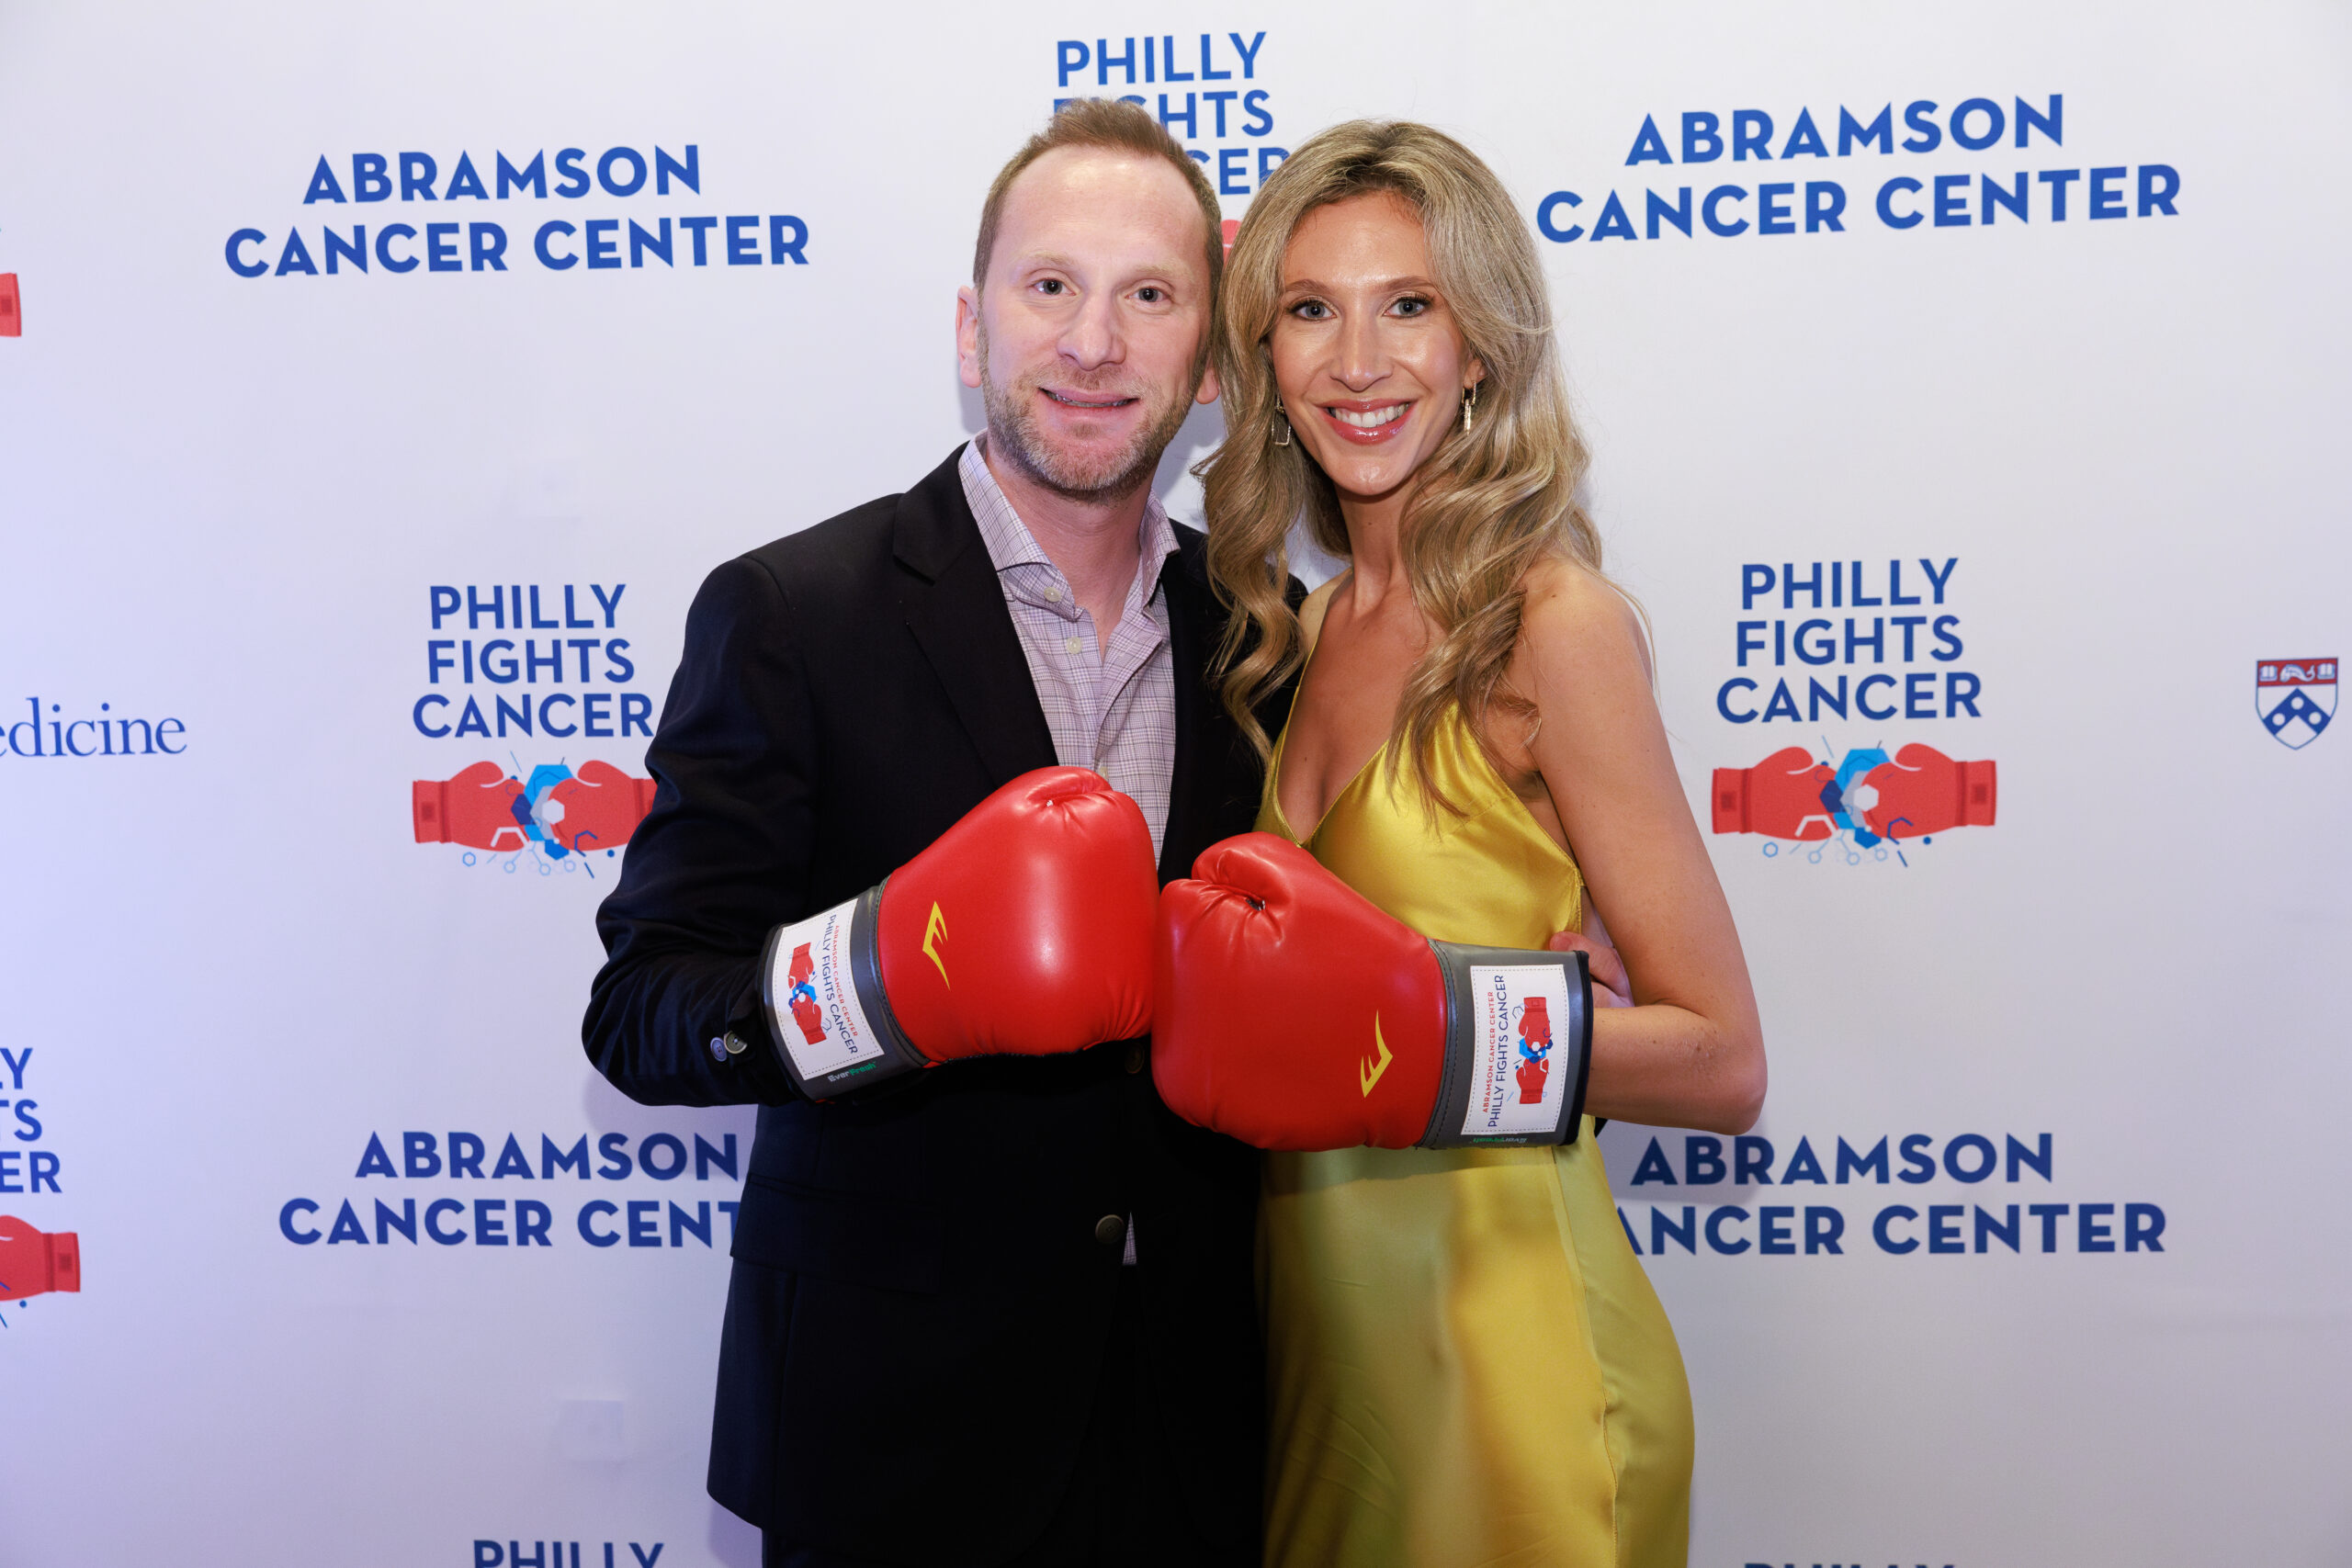 Philly Fights Cancer: Round 6 Guests